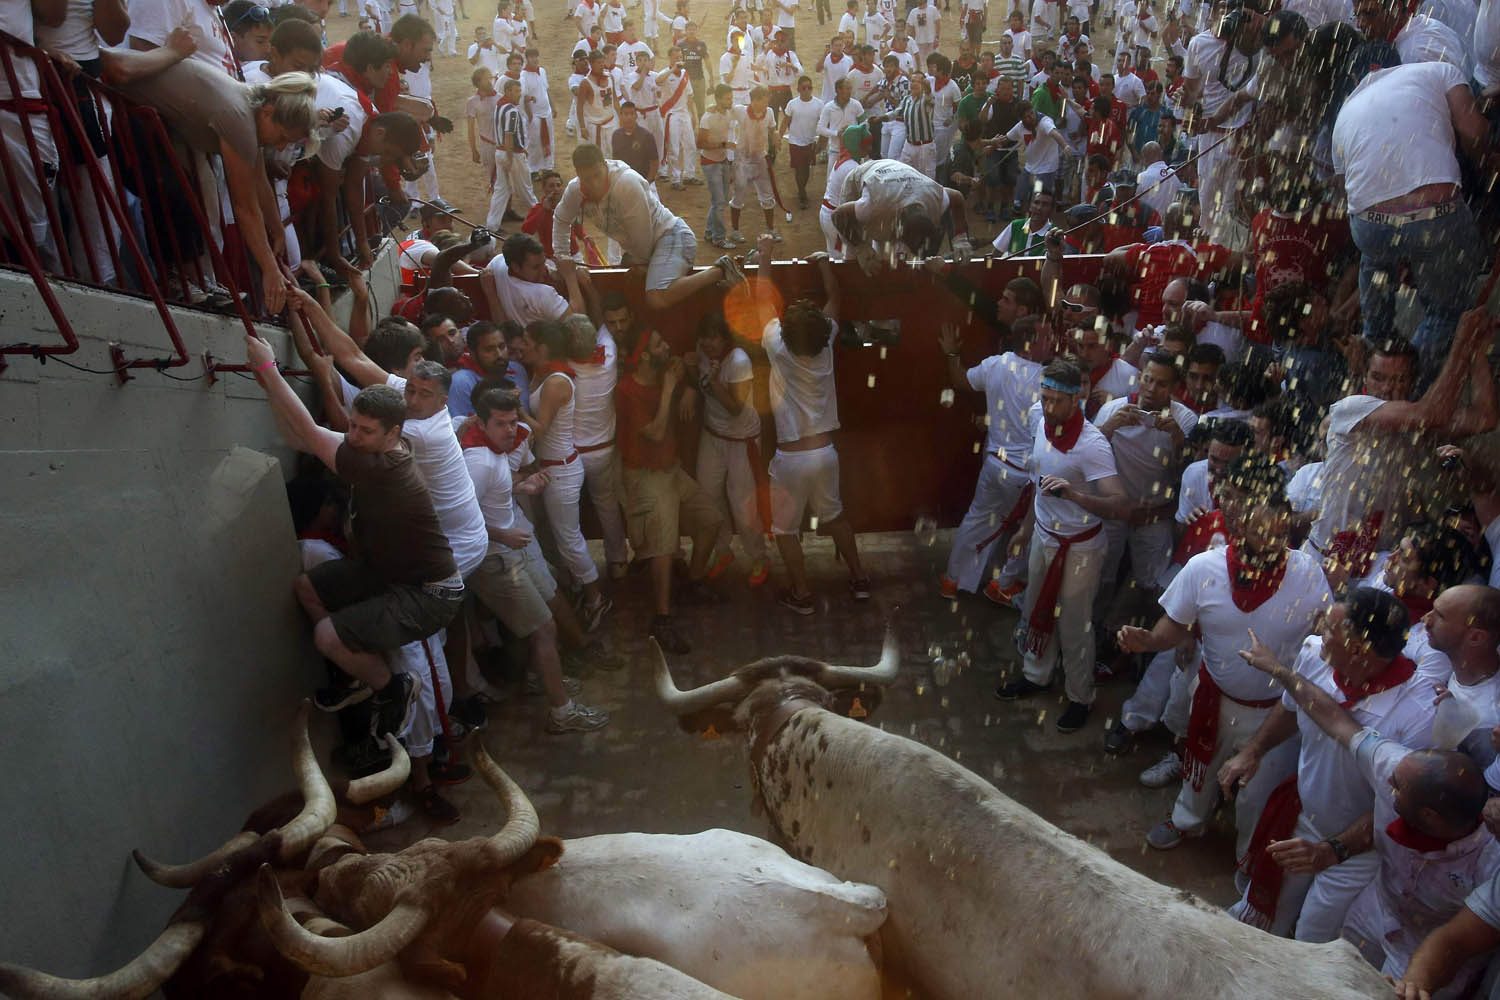 Runners get trapped by steers at the entrance to the bull ring during the third running of the bulls at the San Fermin festival in Pamplona